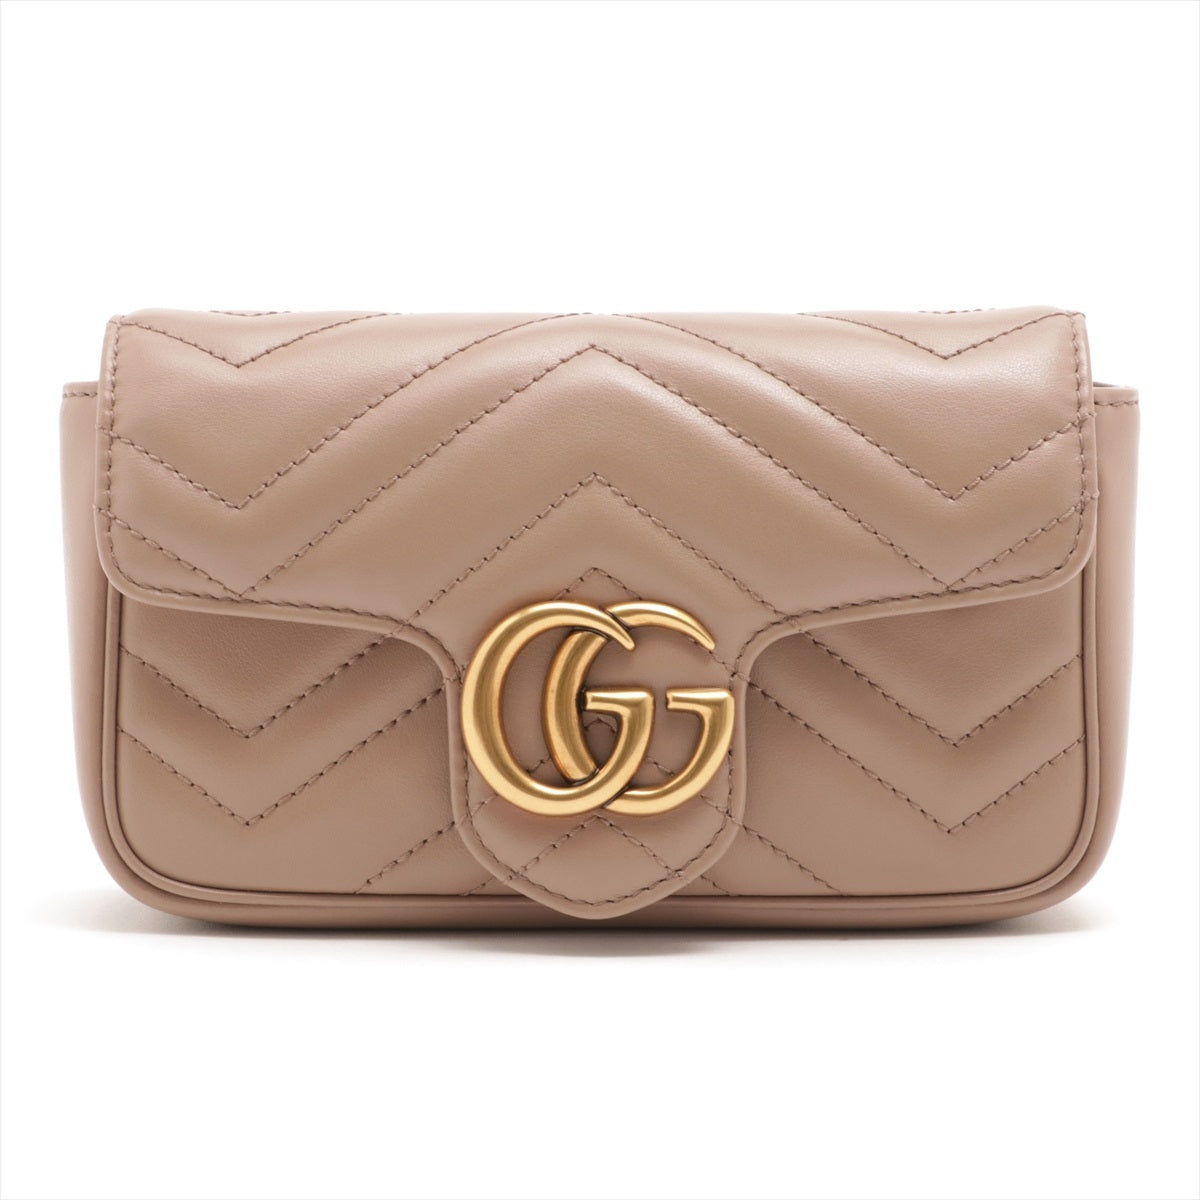 GG Marmont leather super mini bag Dusty pink